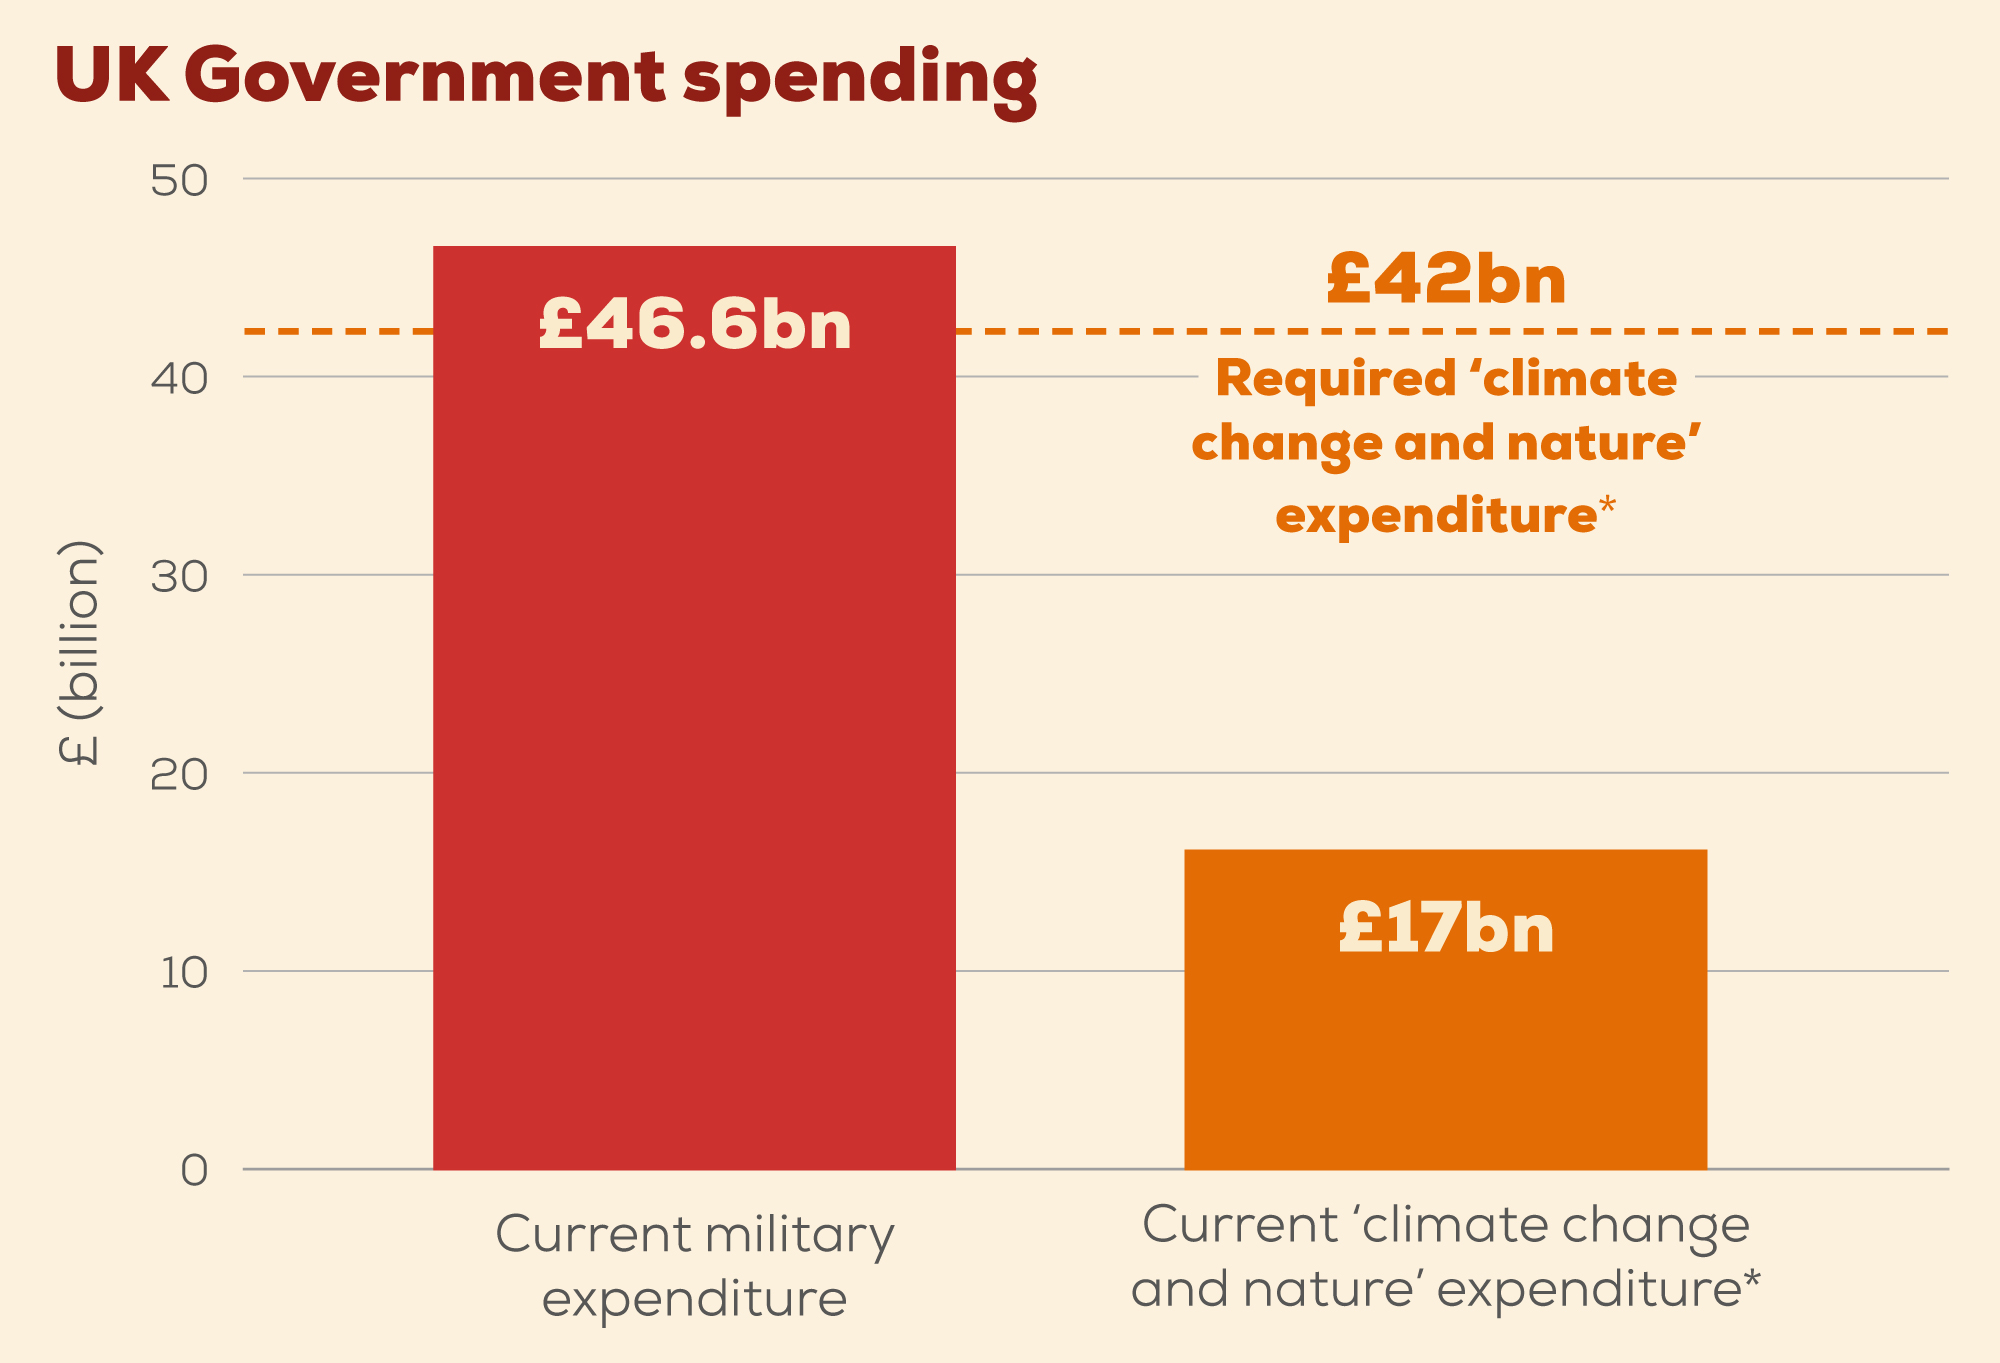 A vertical bar chart with two columns comparing UK government military expenditure with that on 'climate change and nature'